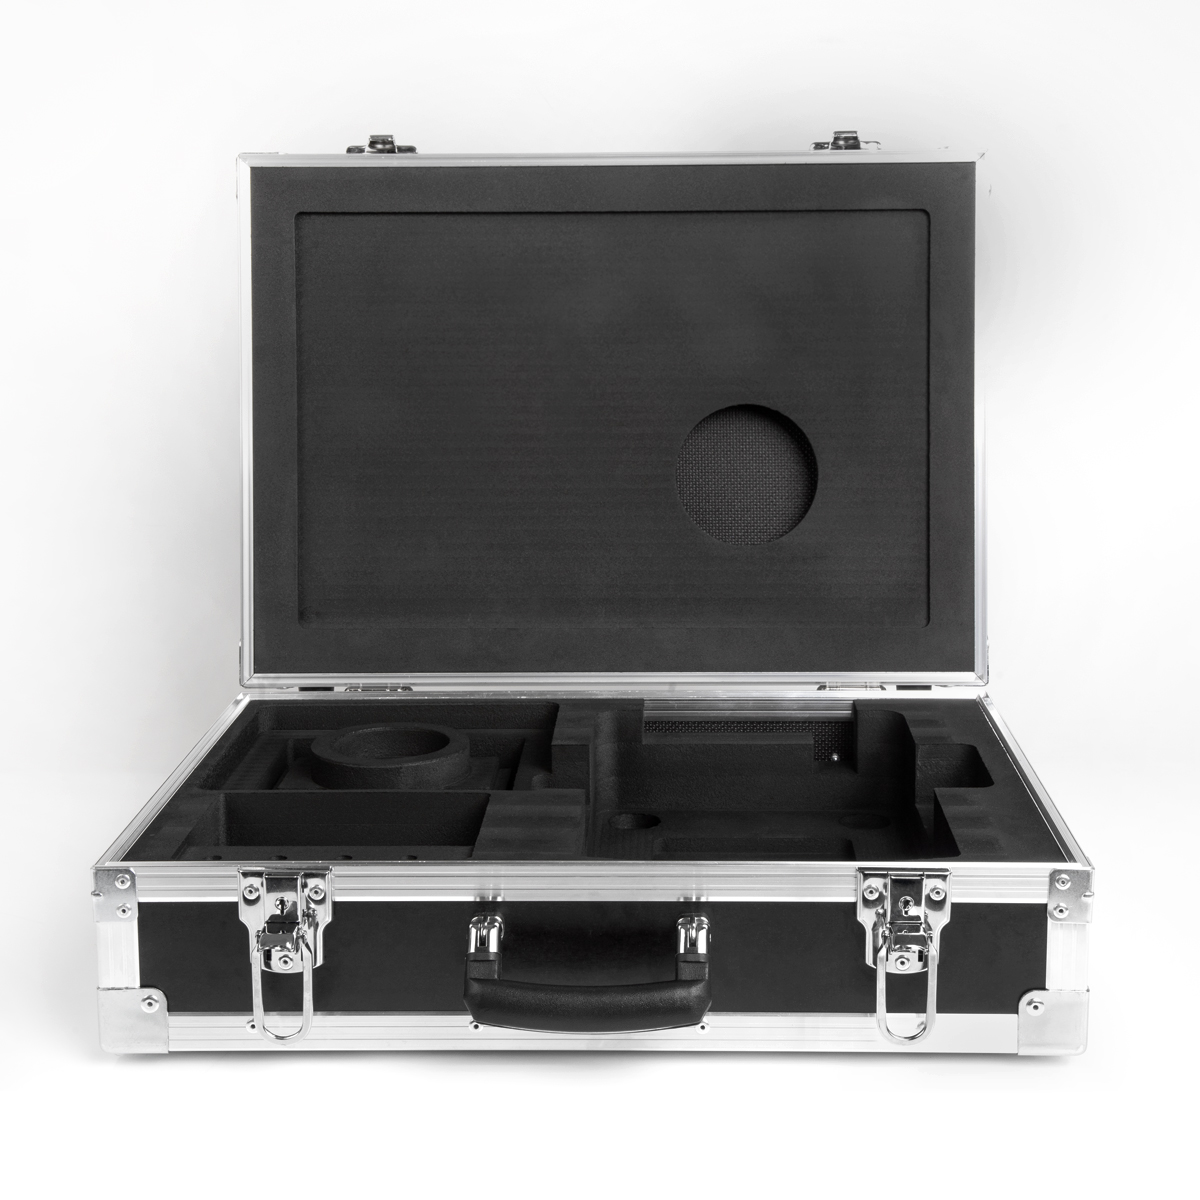 Transport Case for PS, WLC (A1 and A2) Balances › Accessories